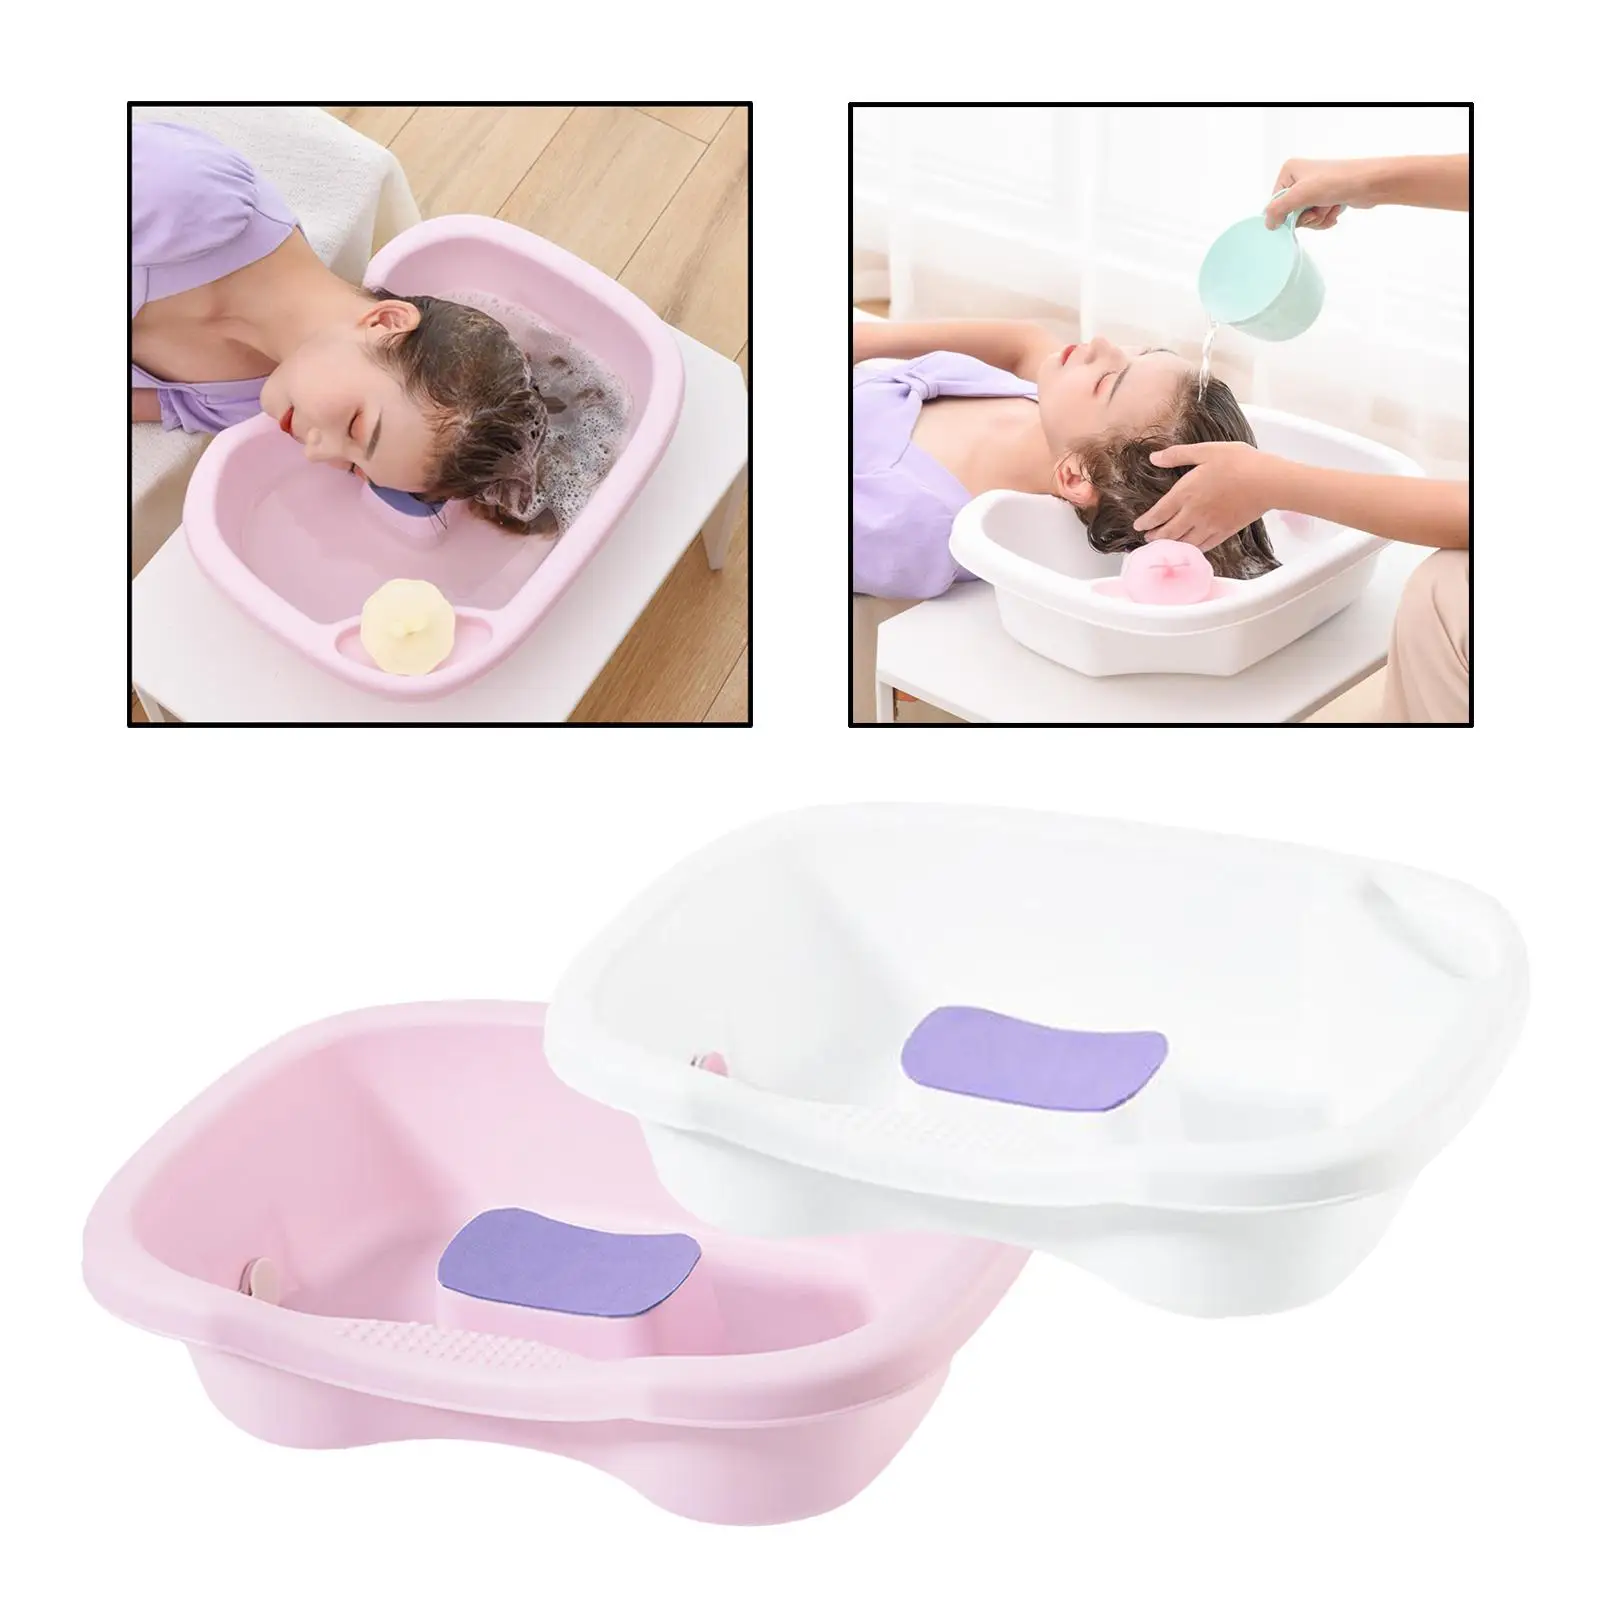 Hair Washing Basin with Tube Bathing Aid Stable Hair Washing Sink for Hair Washing Barber Shop Home Salon Hairdresser Patient